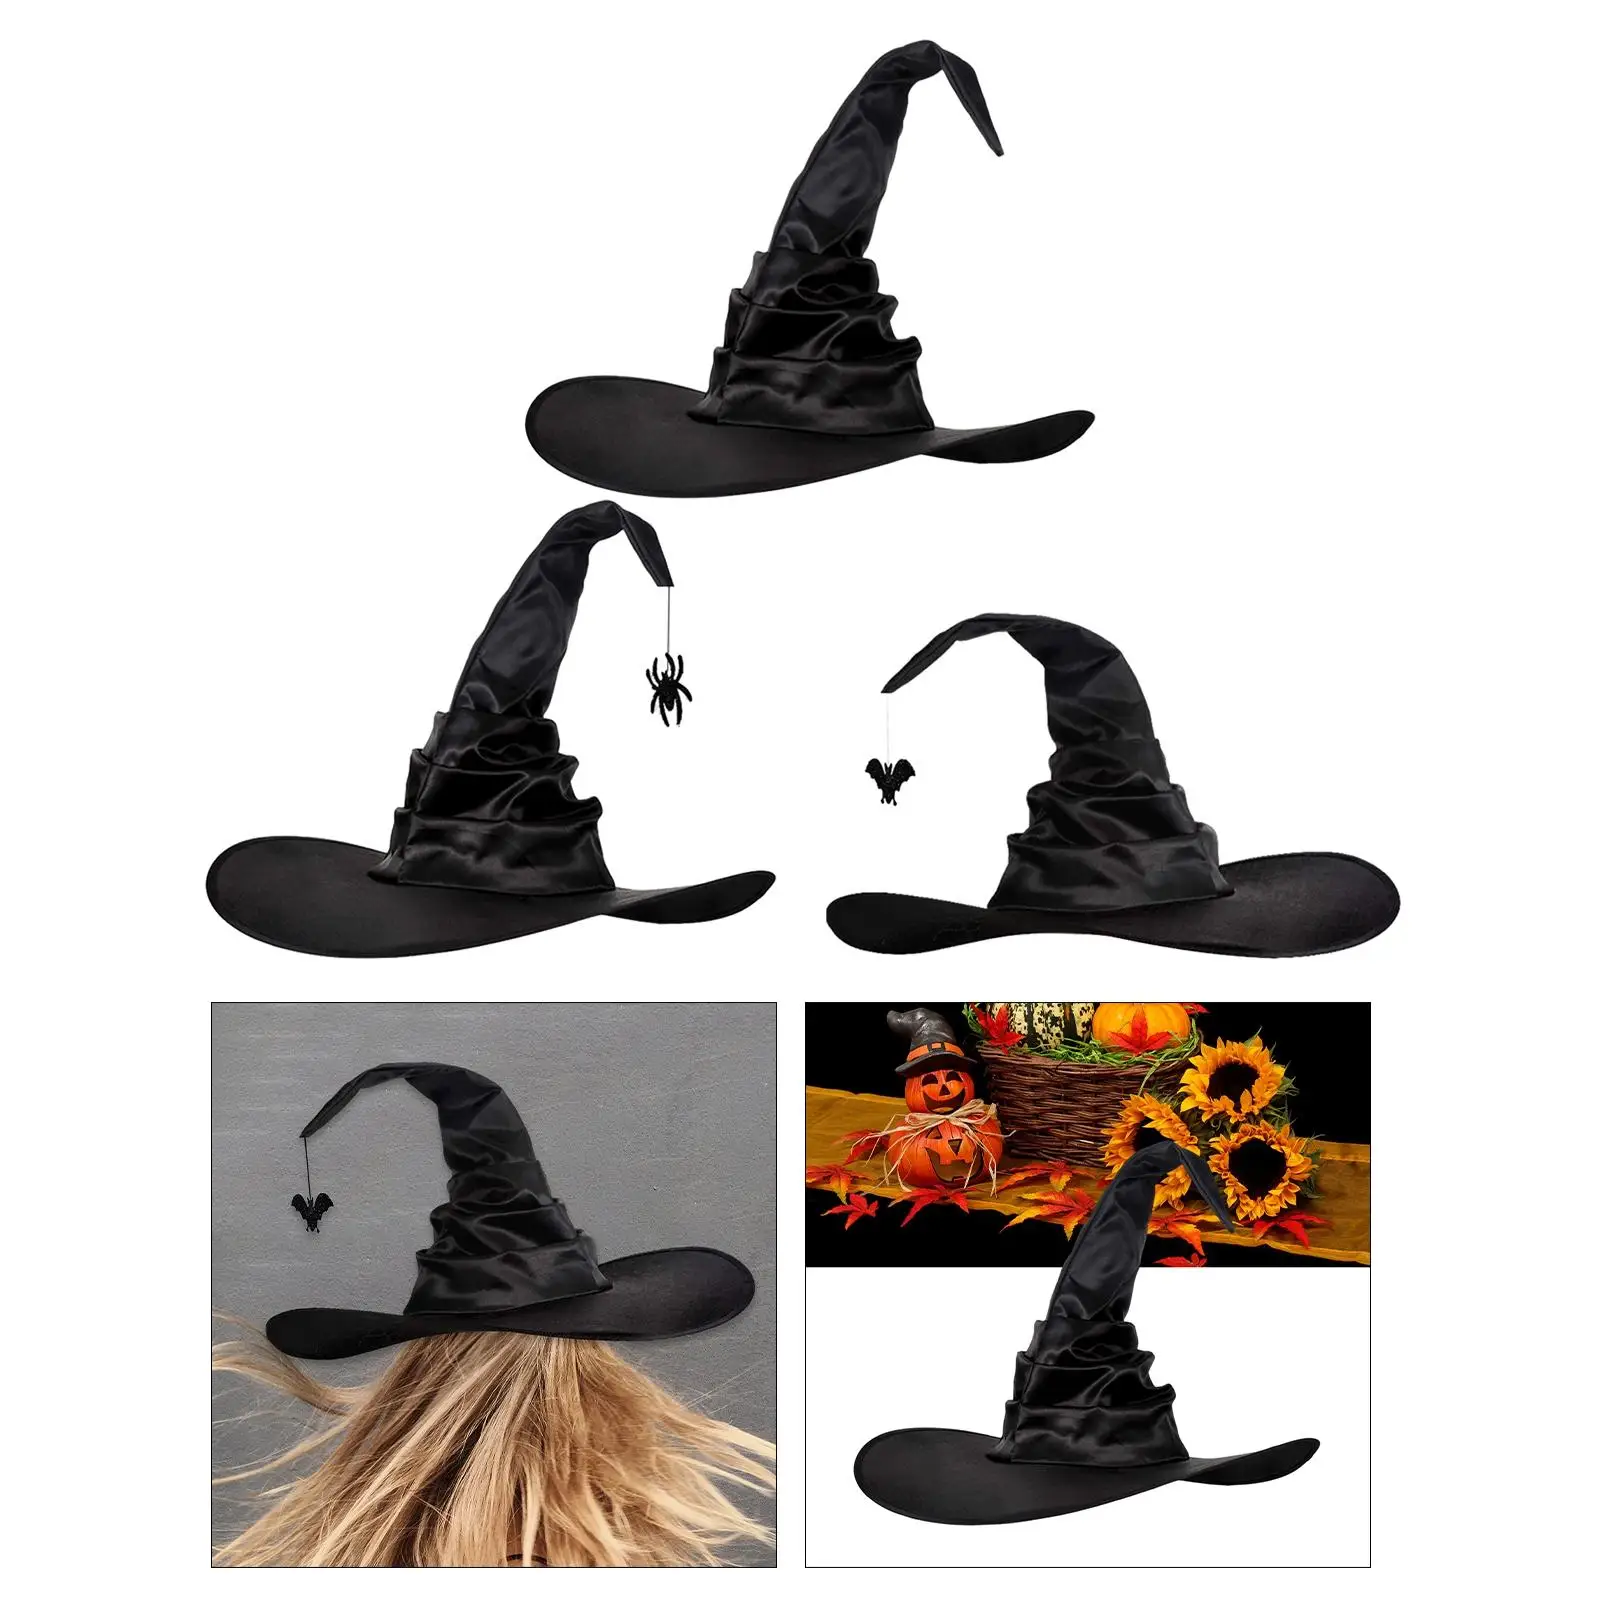 Pointed Top Sorceress Hat Wizard Headgear Witch Women Hat for Halloween, Fancy Dress, Masquerade, Cosplay Costume Accessories